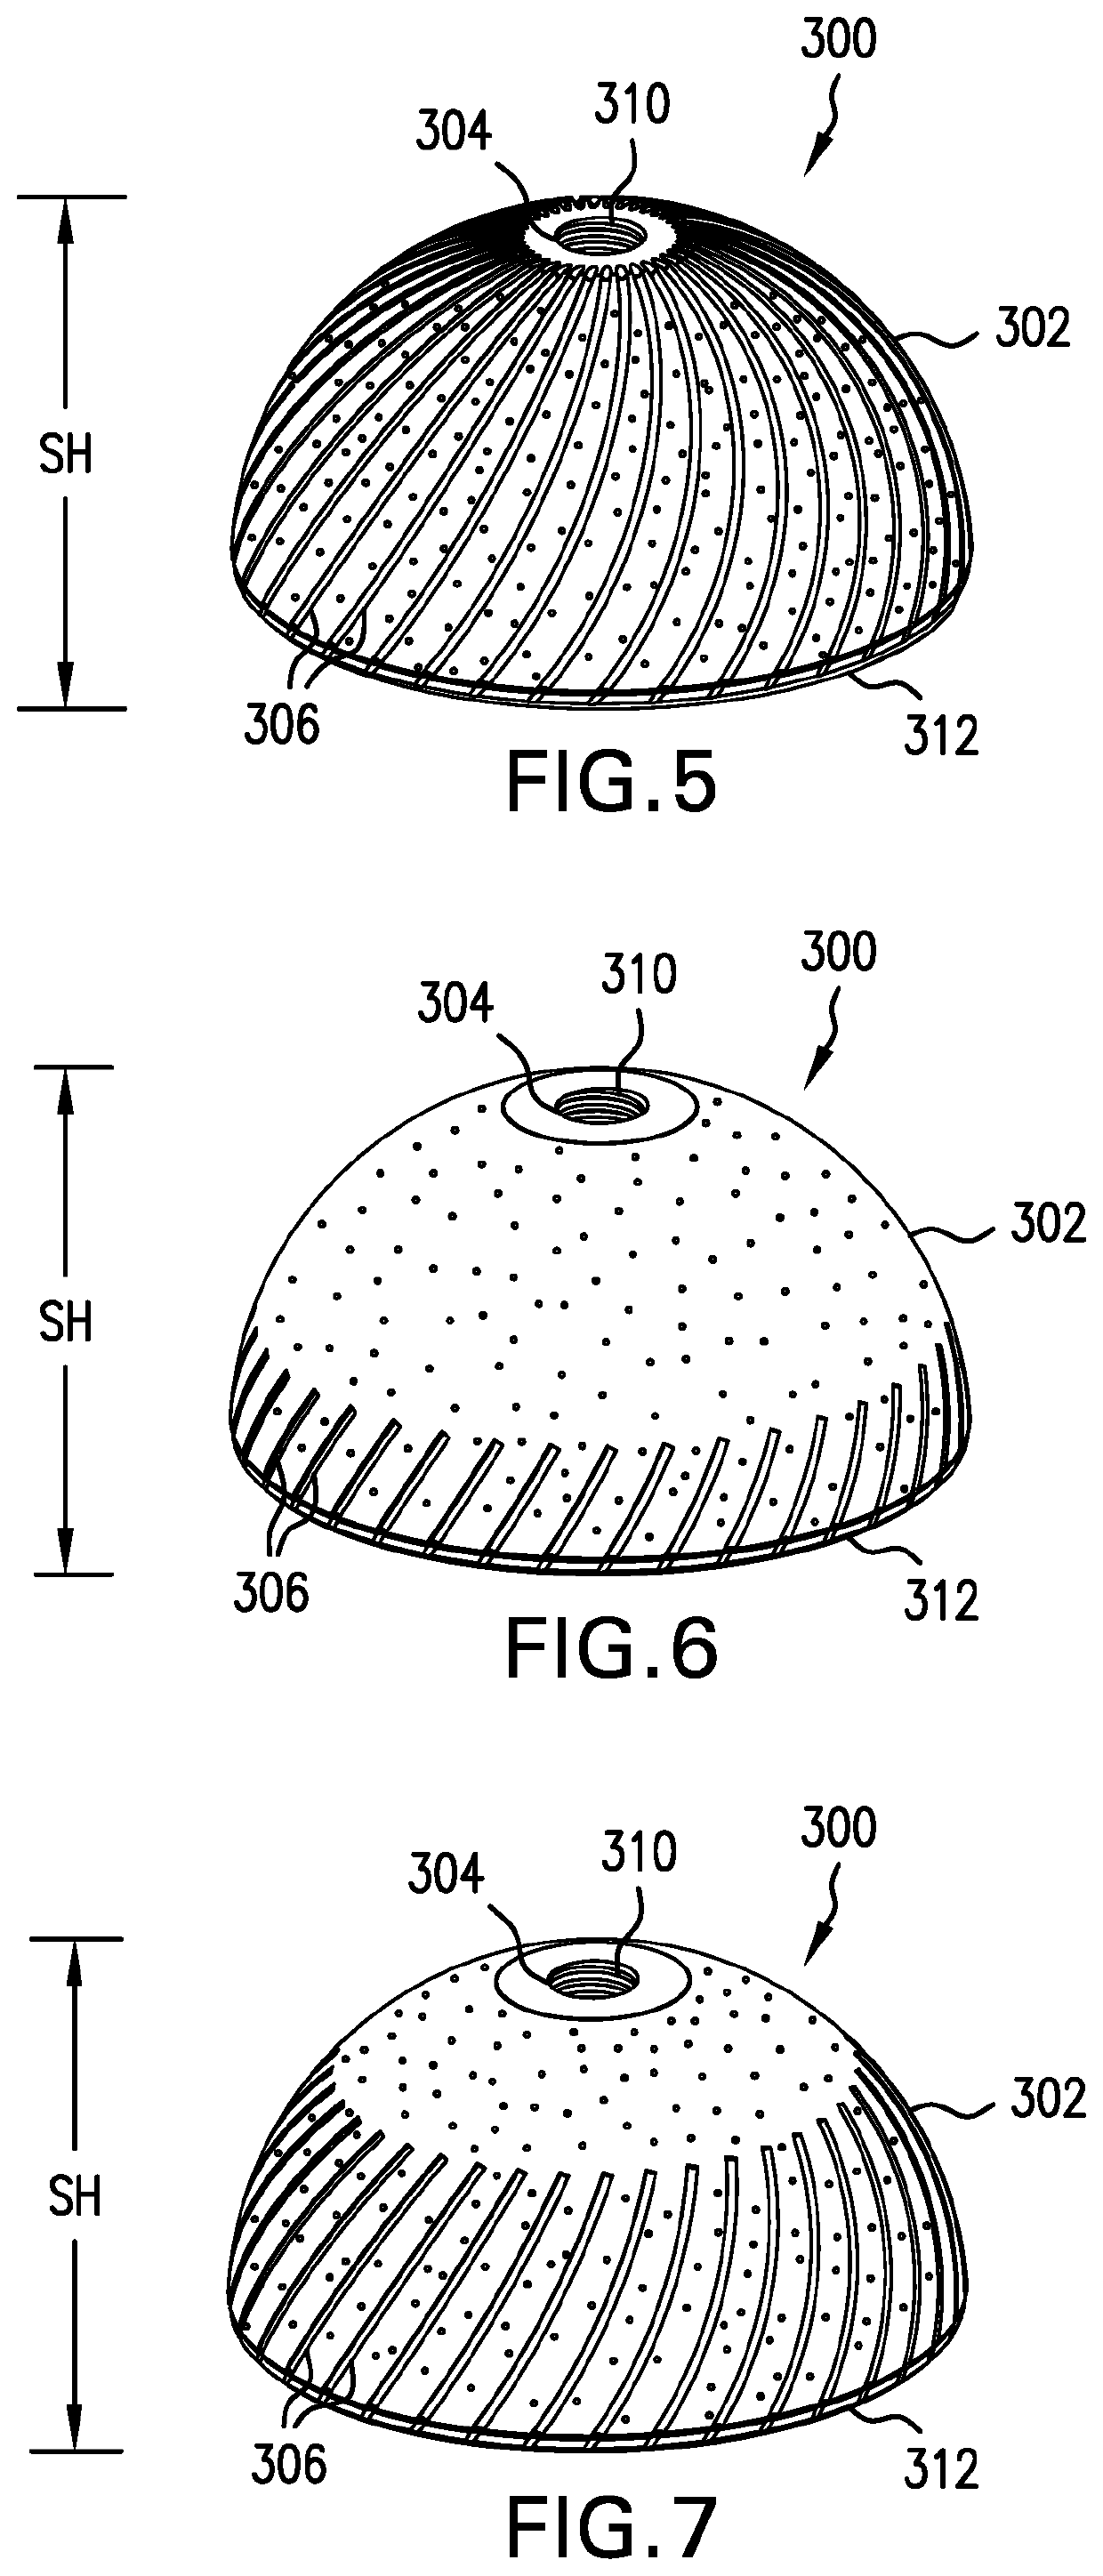 Implants with groove patterns and soft tissue attachment features